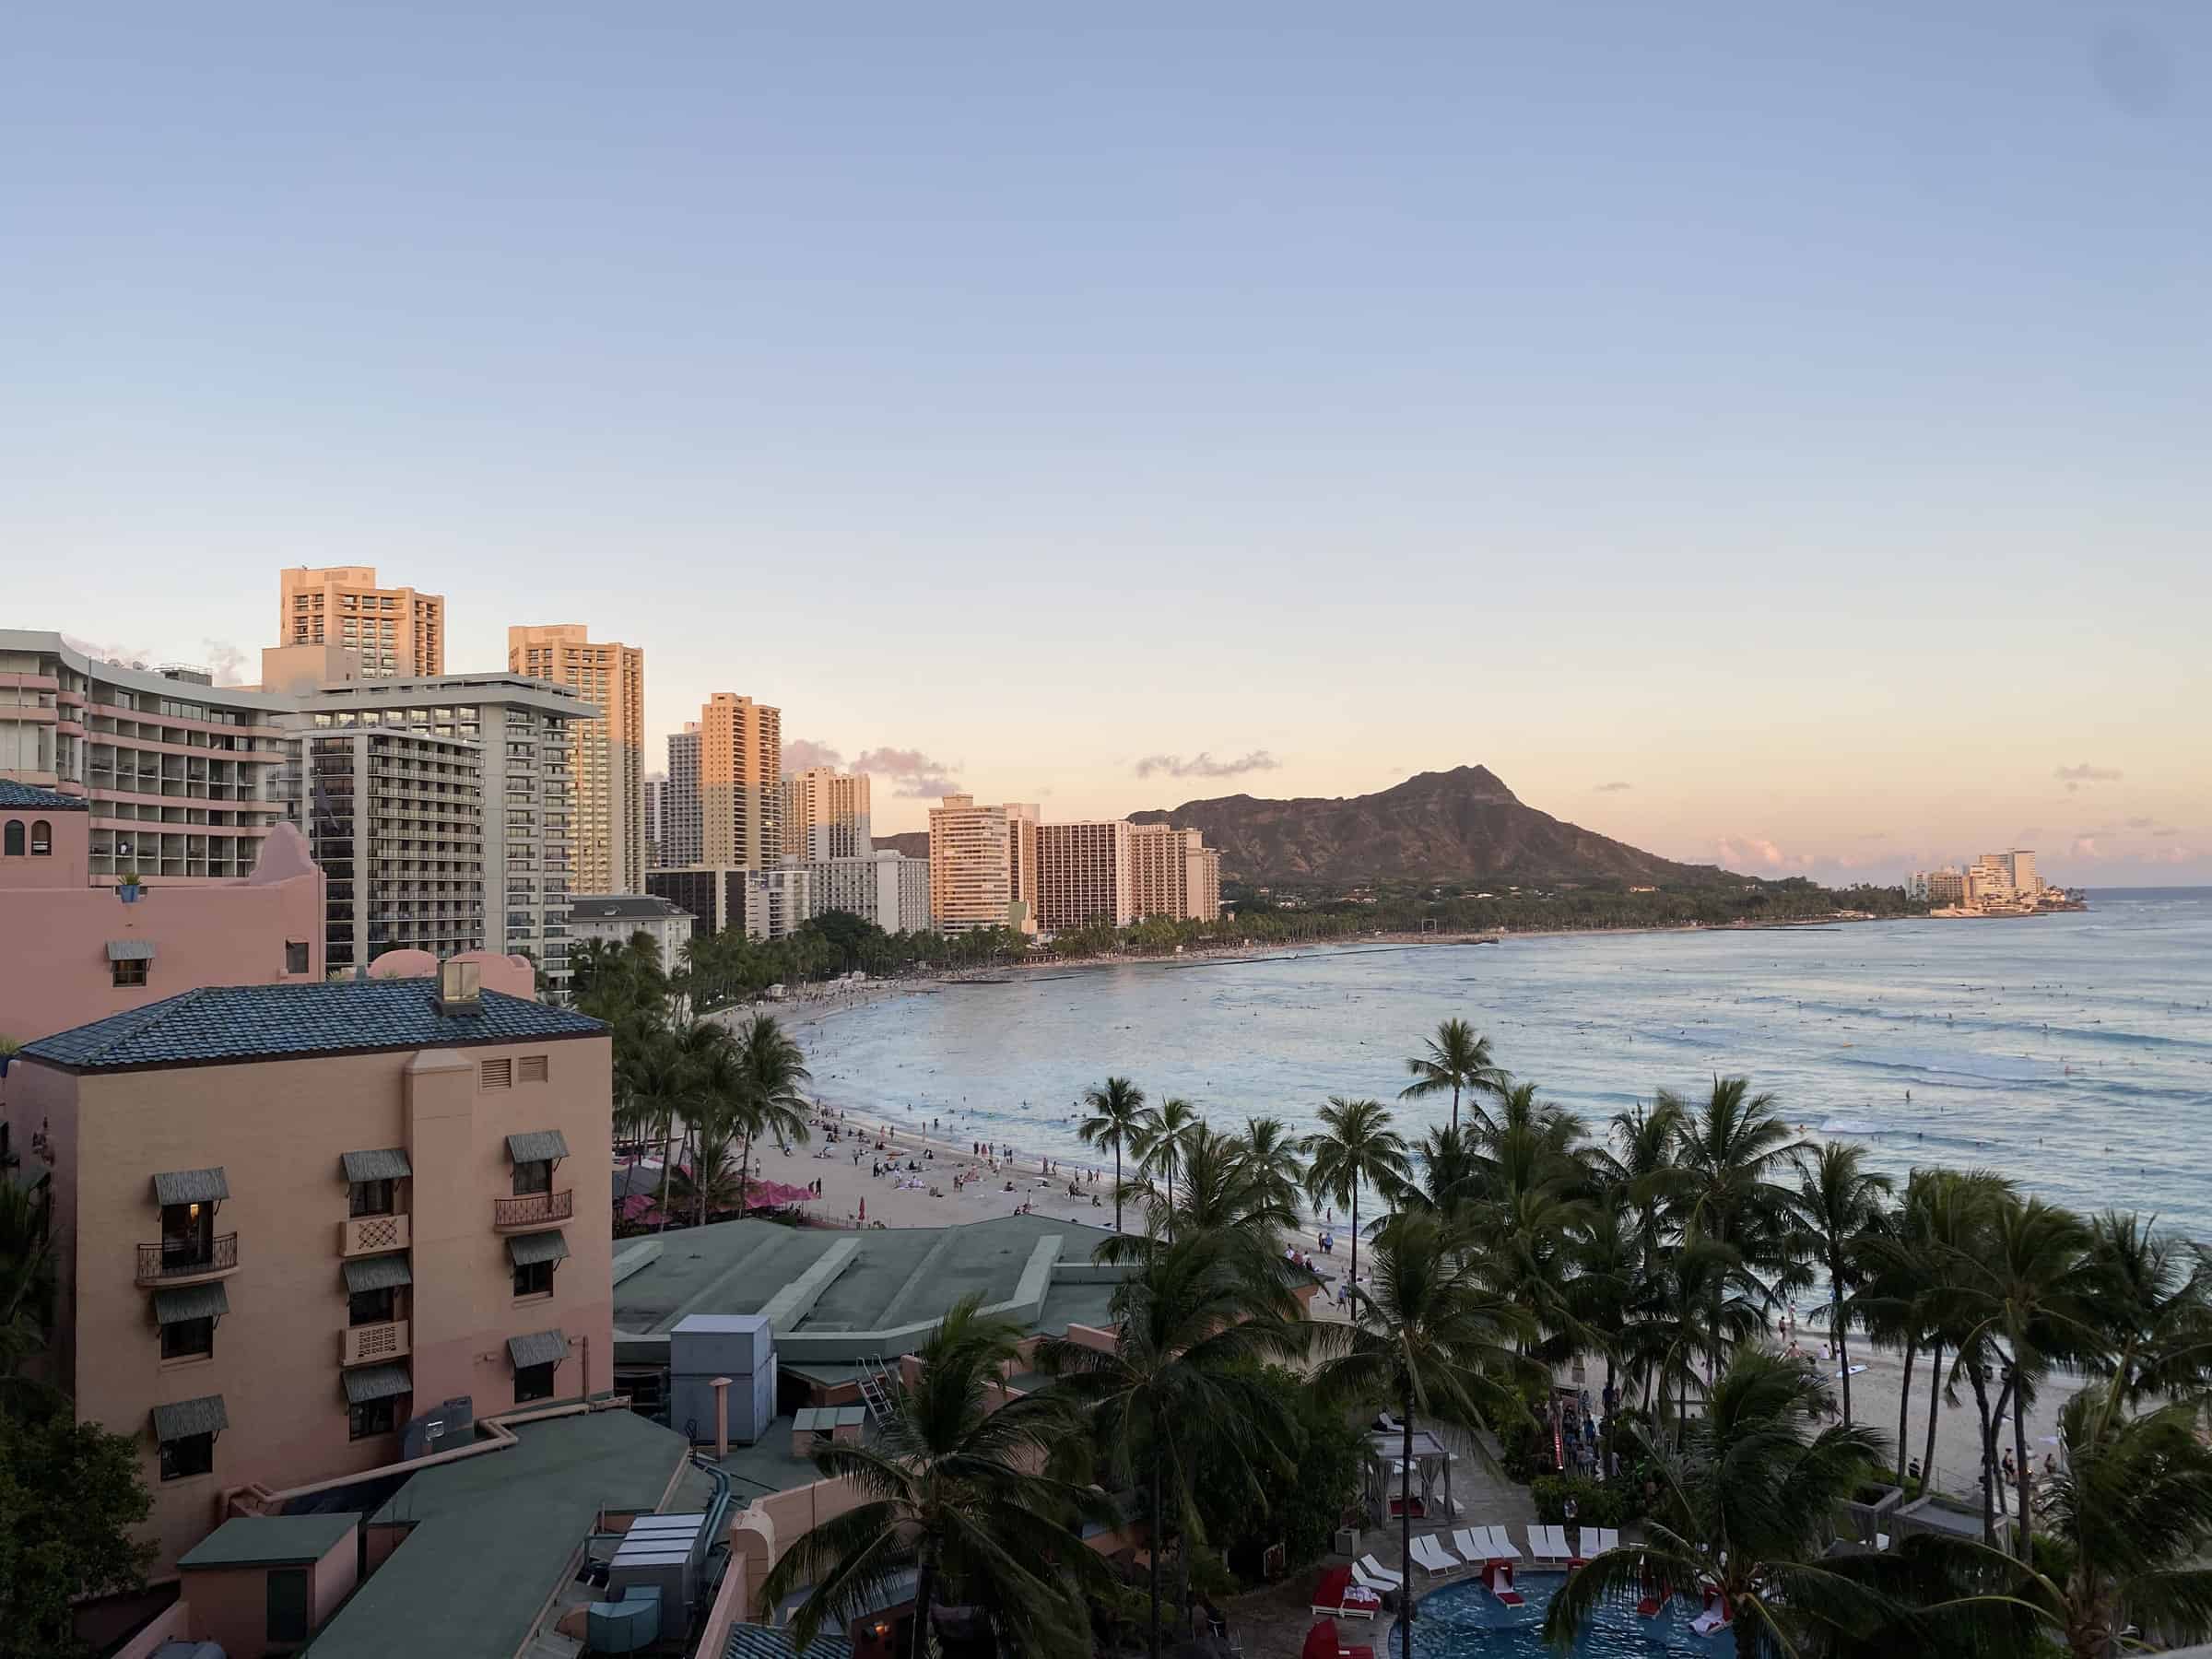 Scenic view of Waikiki Beach in Oahu, Hawaii, at dusk with Diamond Head Crater in the distance. The coastline is lined with palm trees, sandy beaches, and a series of high-rise hotels against a soft pastel sky.